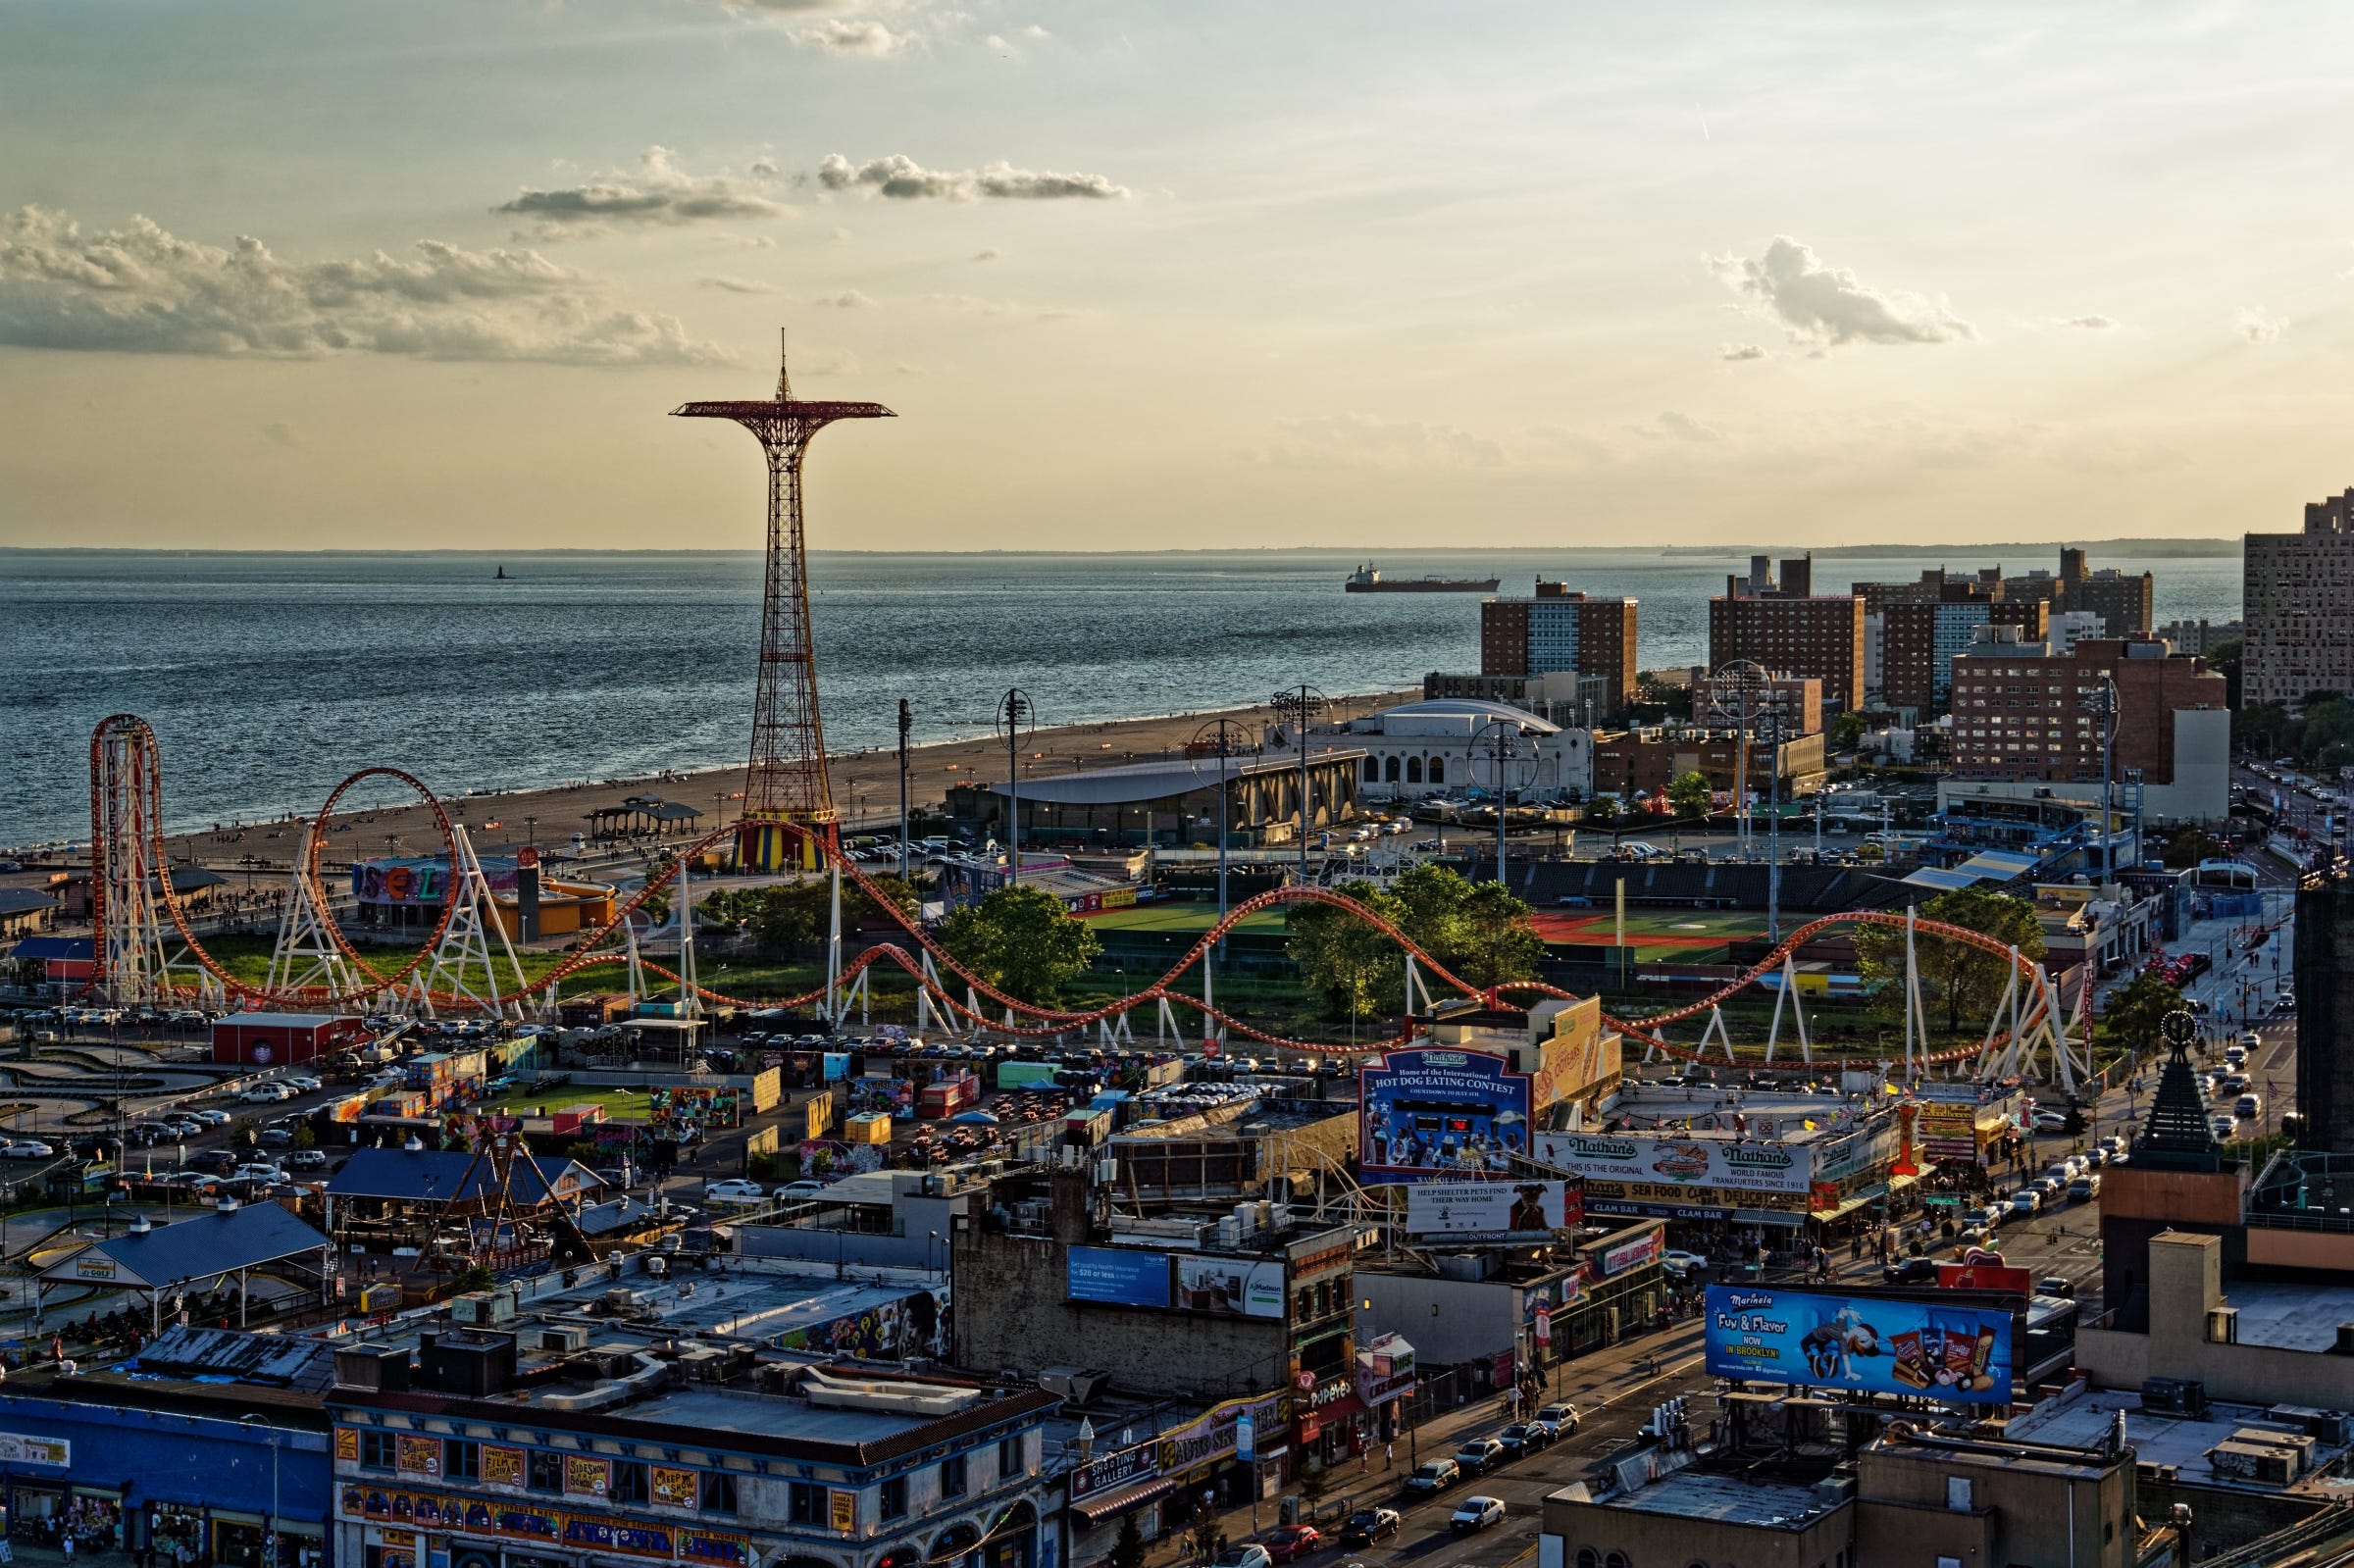 NY amusement parks worth a visit Midway State Park, Six Flags & more